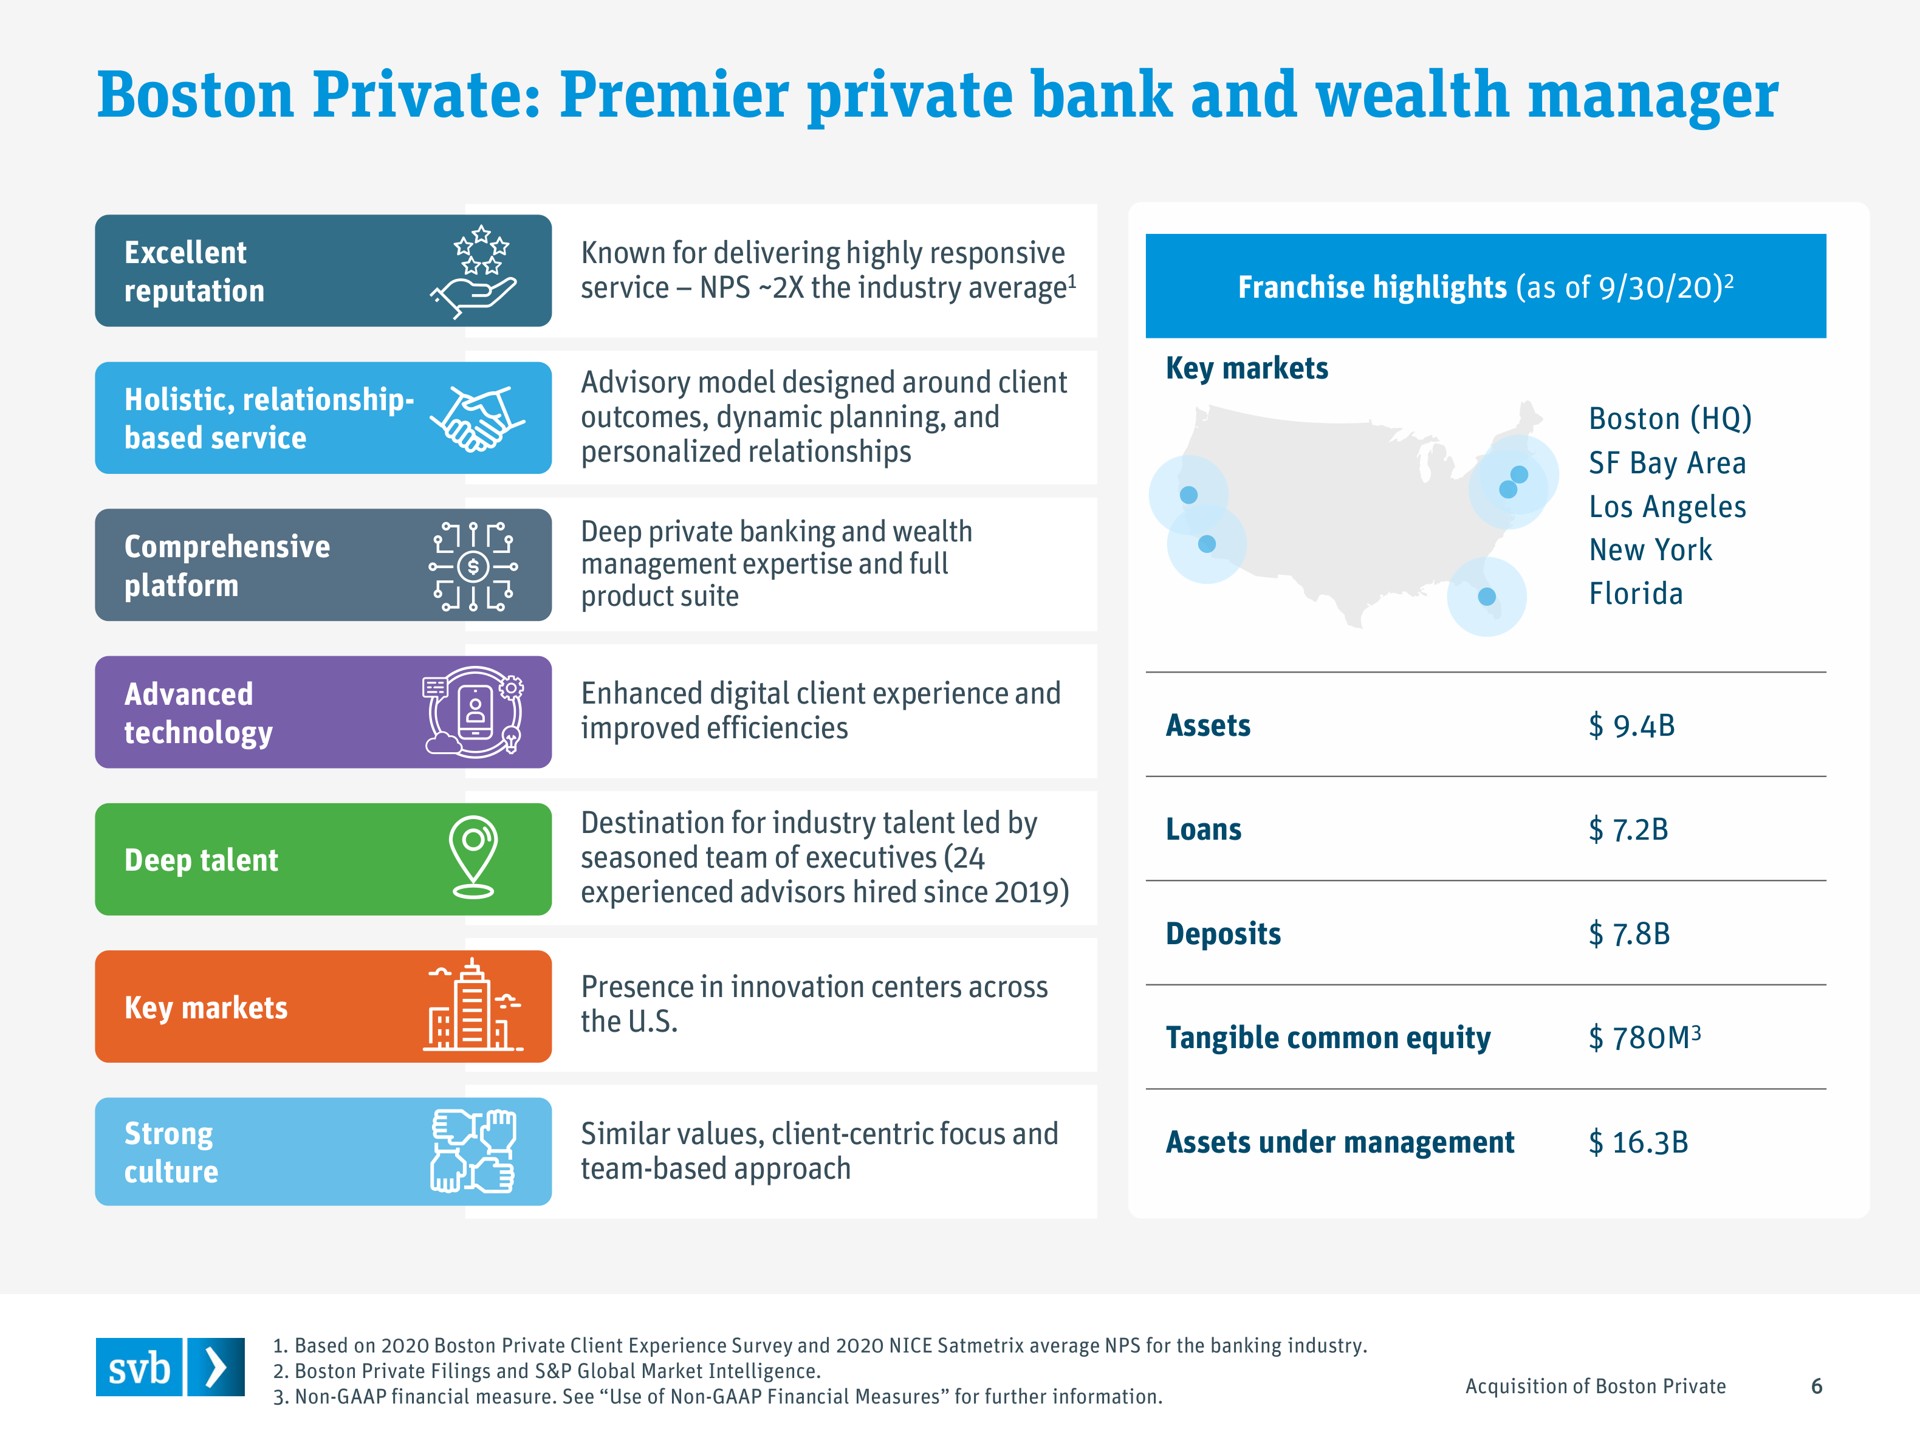 boston private premier private bank and wealth manager | Silicon Valley Bank